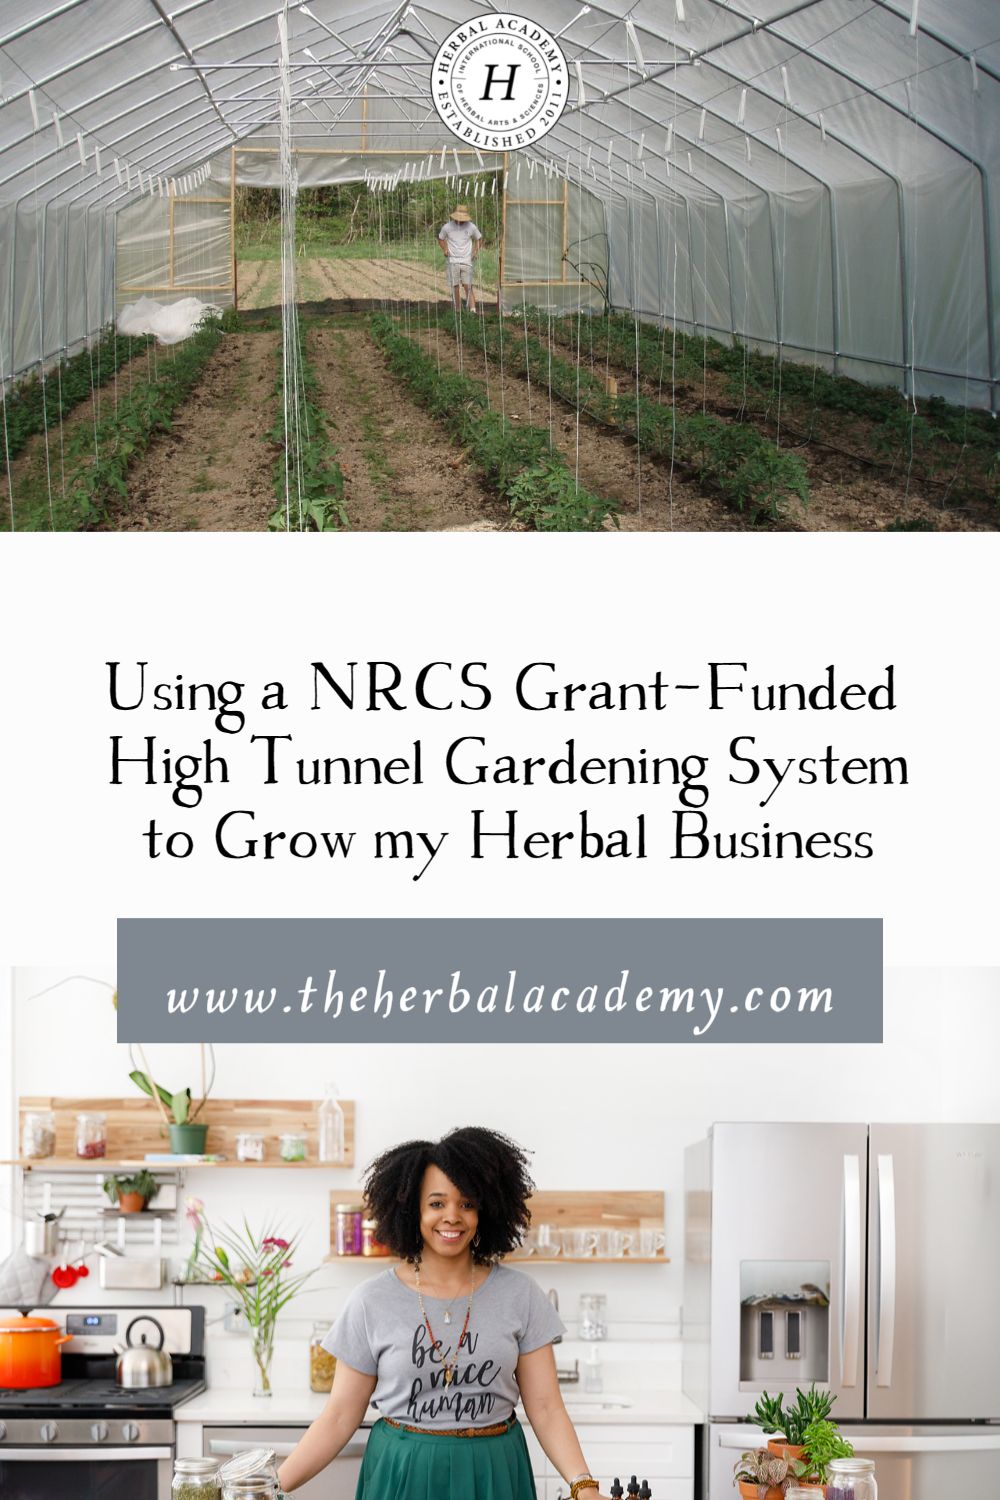 Using a NRCS Grant-Funded High Tunnel Gardening System to Grow my Herbal Business | Herbal Academy | Learn how to get a High Tunnel System for your herb farm with financial assistance via the Environmental Quality Incentives Program.